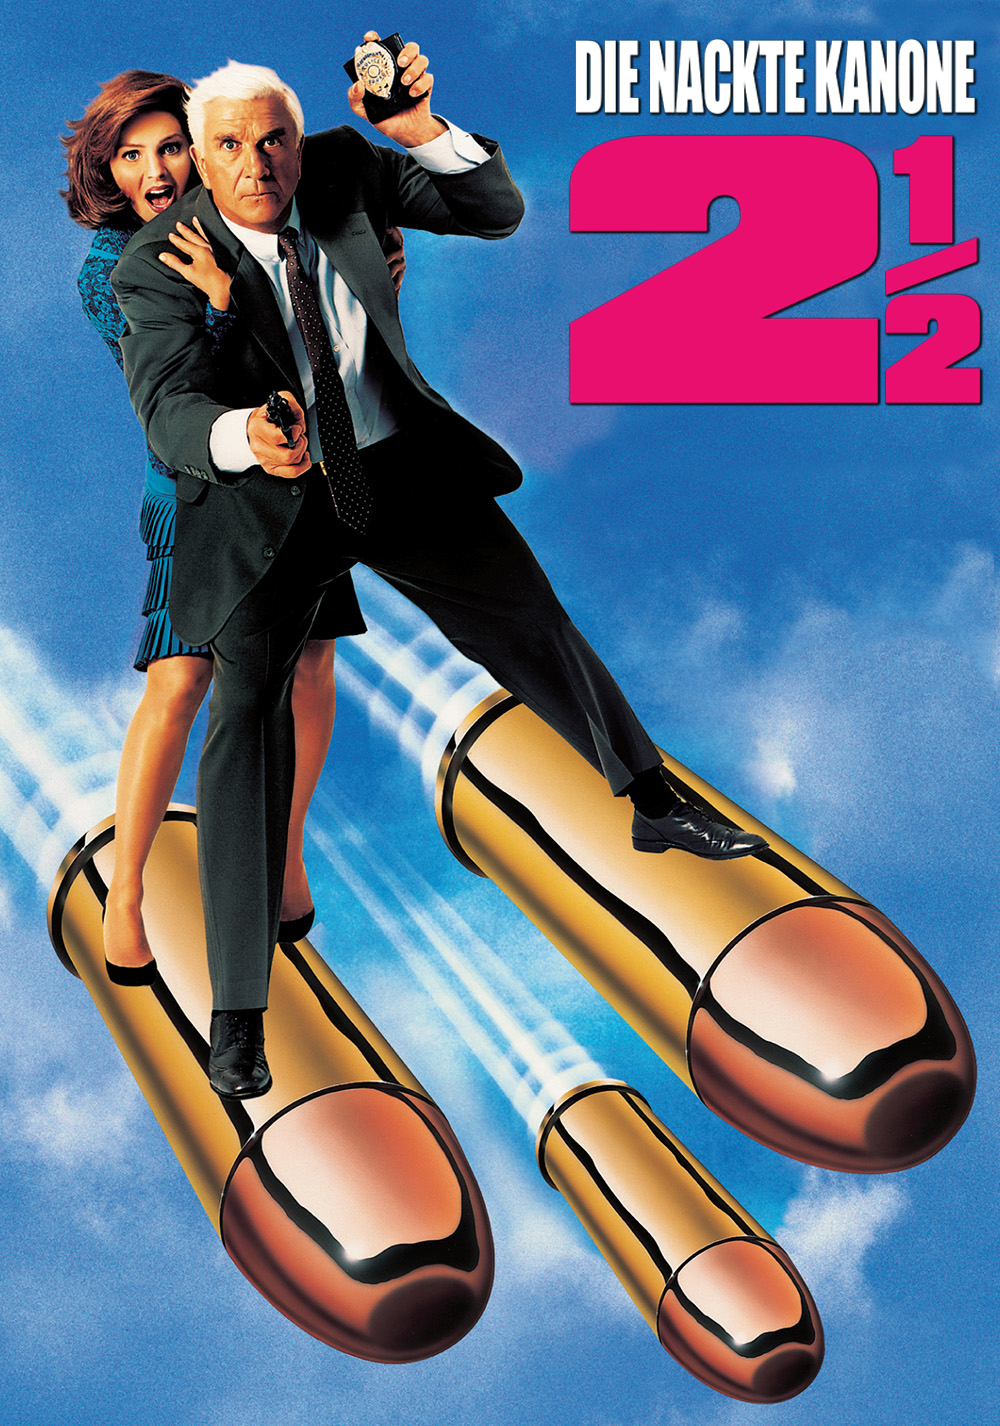 View, Download, Rate, and Comment on this The Naked Gun 2½: The Smell of Fe...